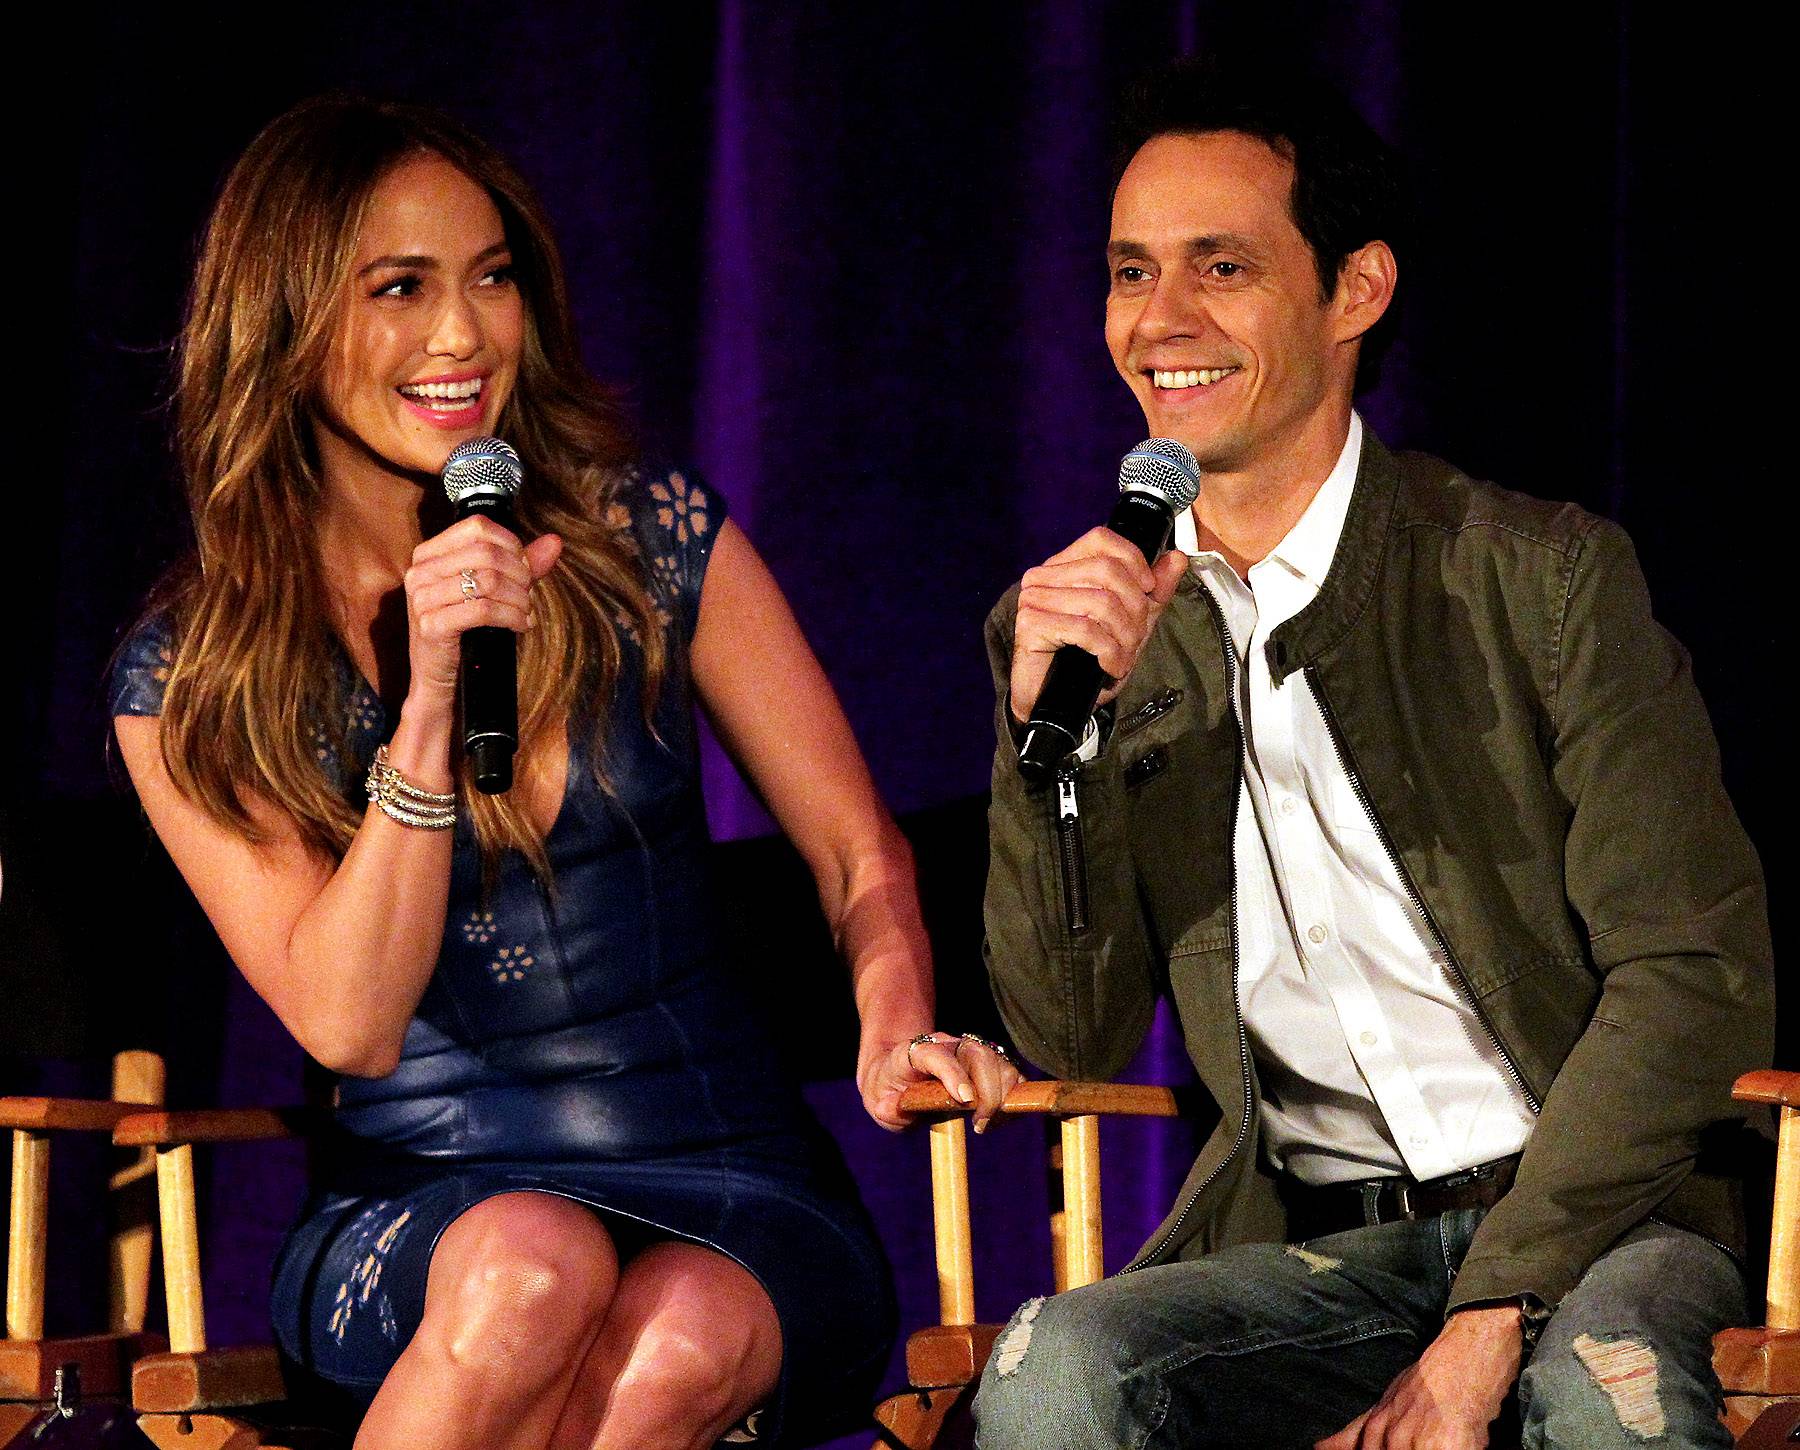 No Beef Here - Jennifer Lopez and soon-to-be ex-husband Marc Anthony look downright convivial despite all the tabloid fodder about their vicious divorce. Here the two talk to press at the 2012 Winter Television Critics Association Press Tour at The Langham Huntington Hotel and Spa in Pasadena, California. (Photo: Frederick M. Brown/Getty Images)